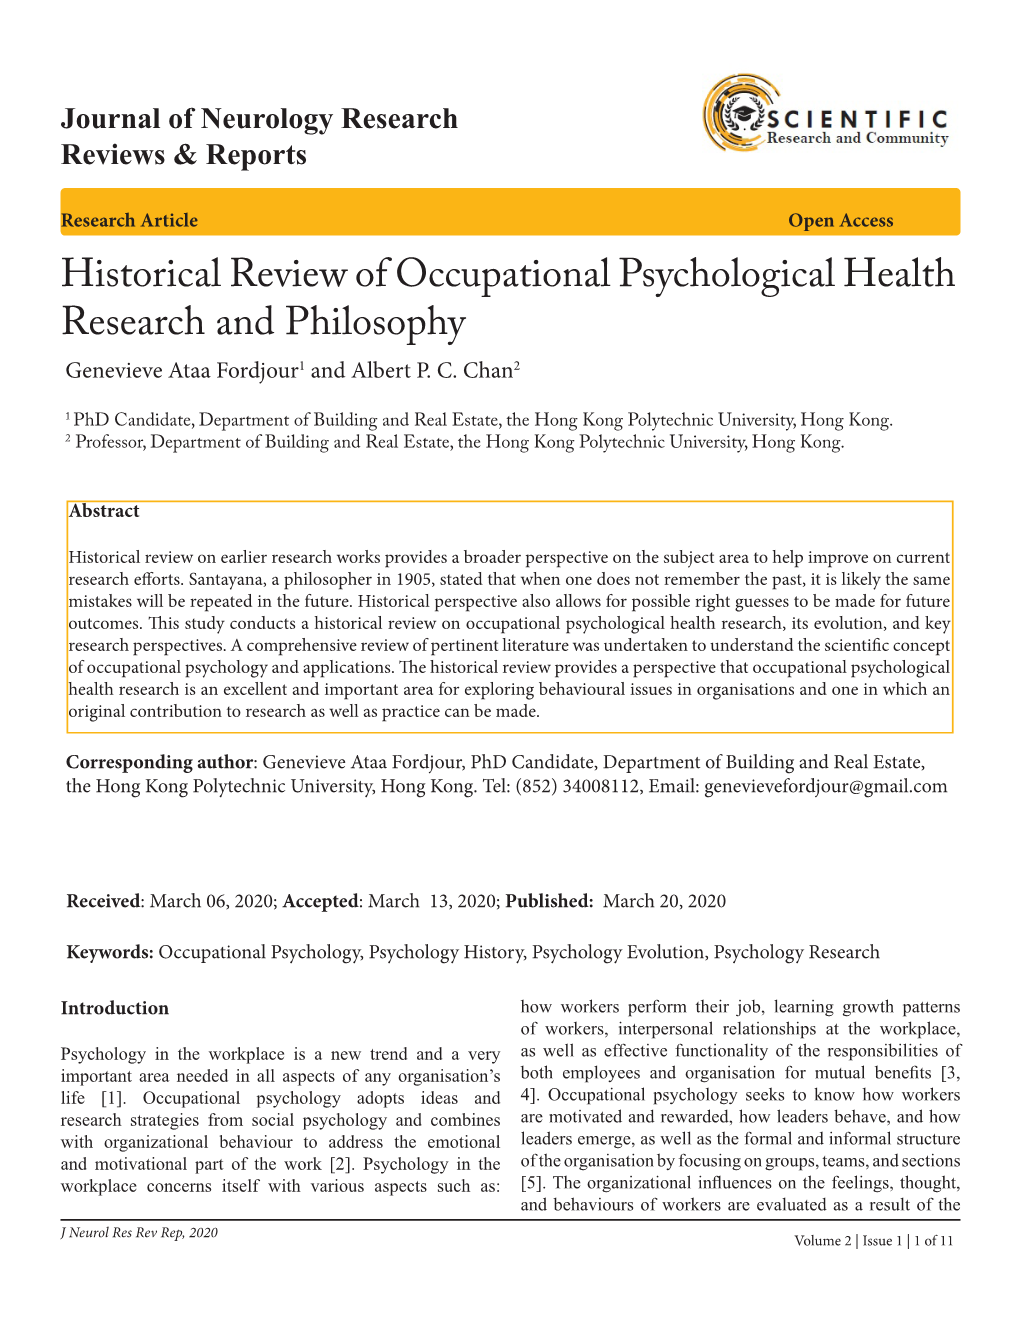 Historical Review of Occupational Psychological Health Research and Philosophy Genevieve Ataa Fordjour1 and Albert P